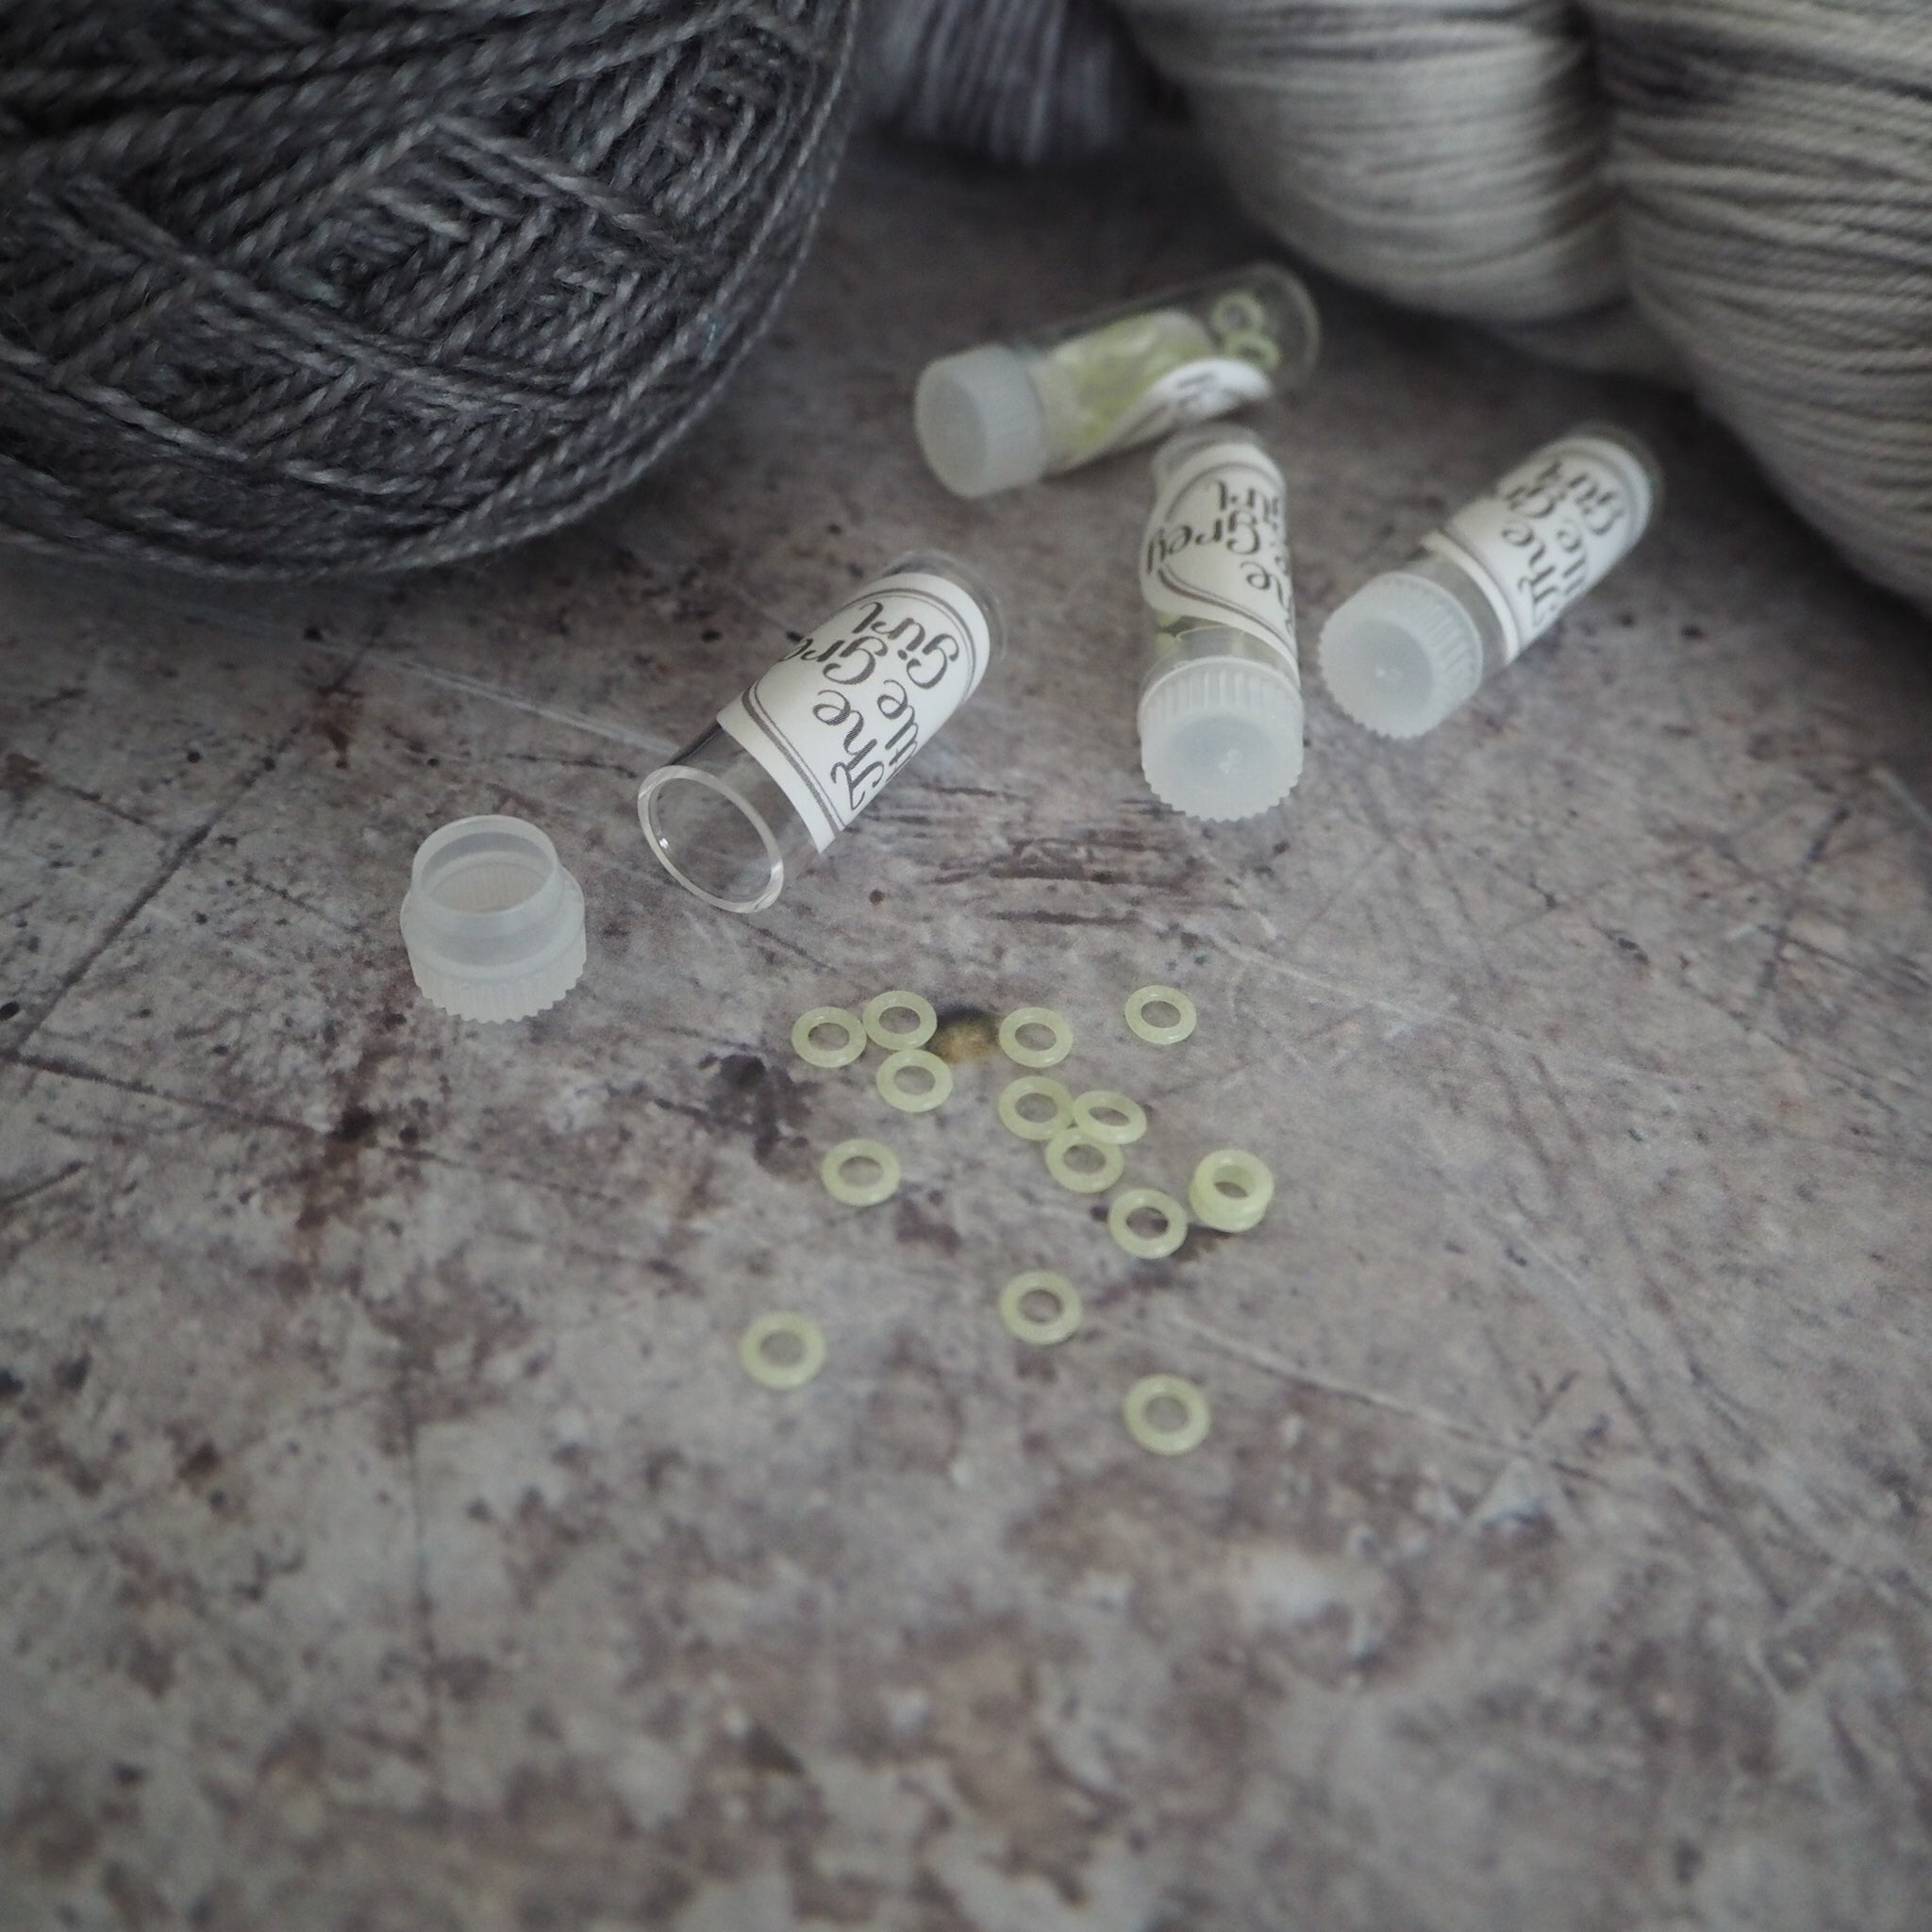 Glow in the Dark Rubber Stitch Markers - The Little Grey Girl